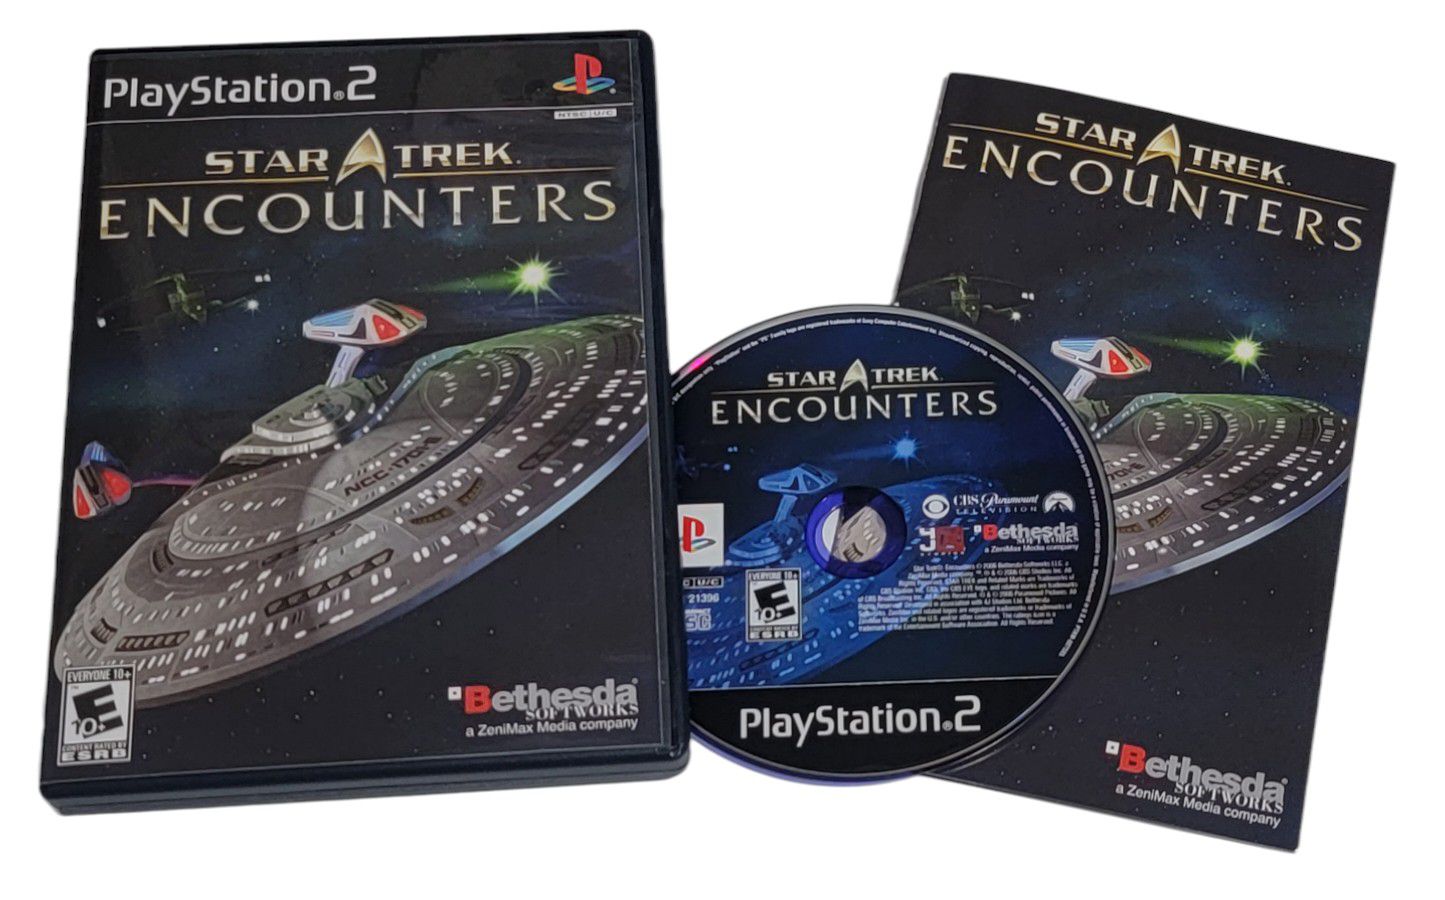 Star Trek: Encounters PS2 PlayStation 2 Space Simulation Shoot Em' Up Video Game